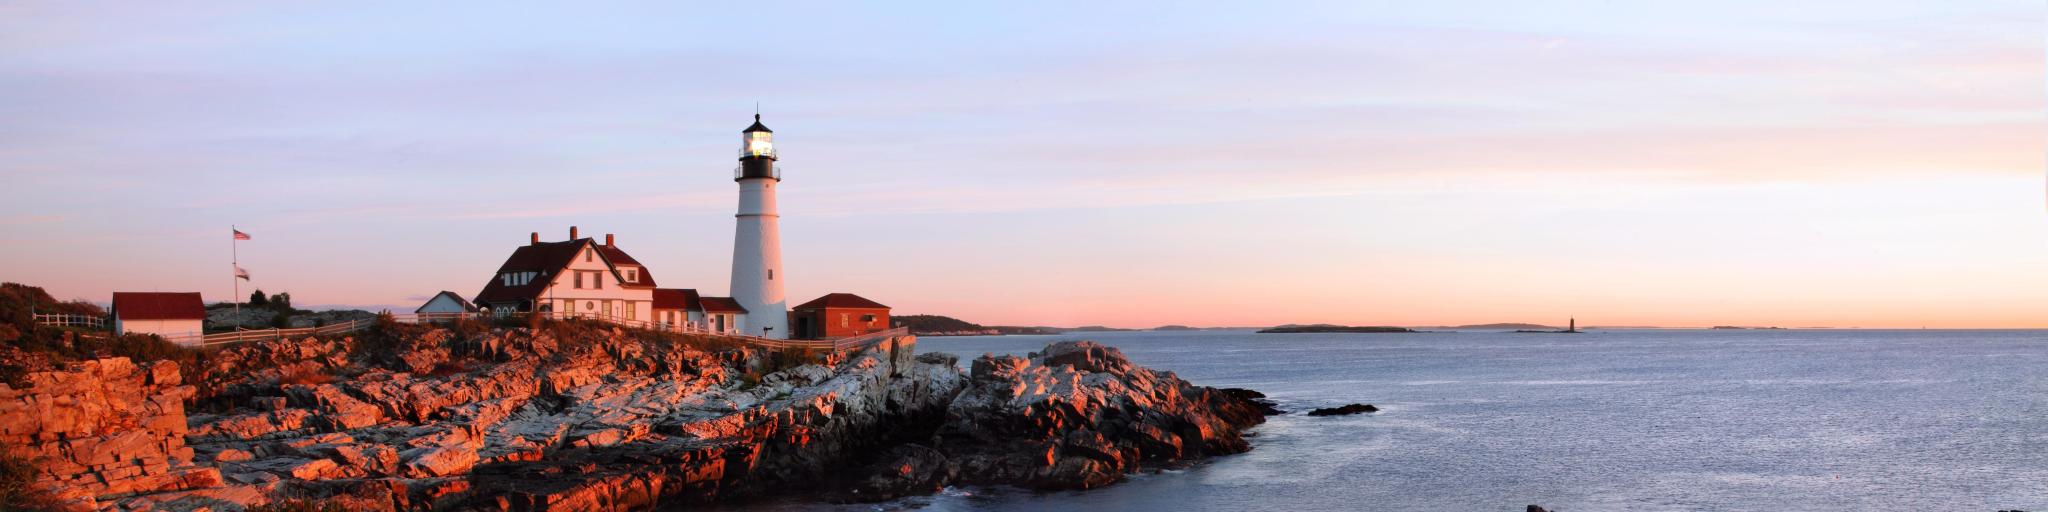 Panorama of Portland Head Lighthouse at dawn's first light, casting a warm glow on the rocks